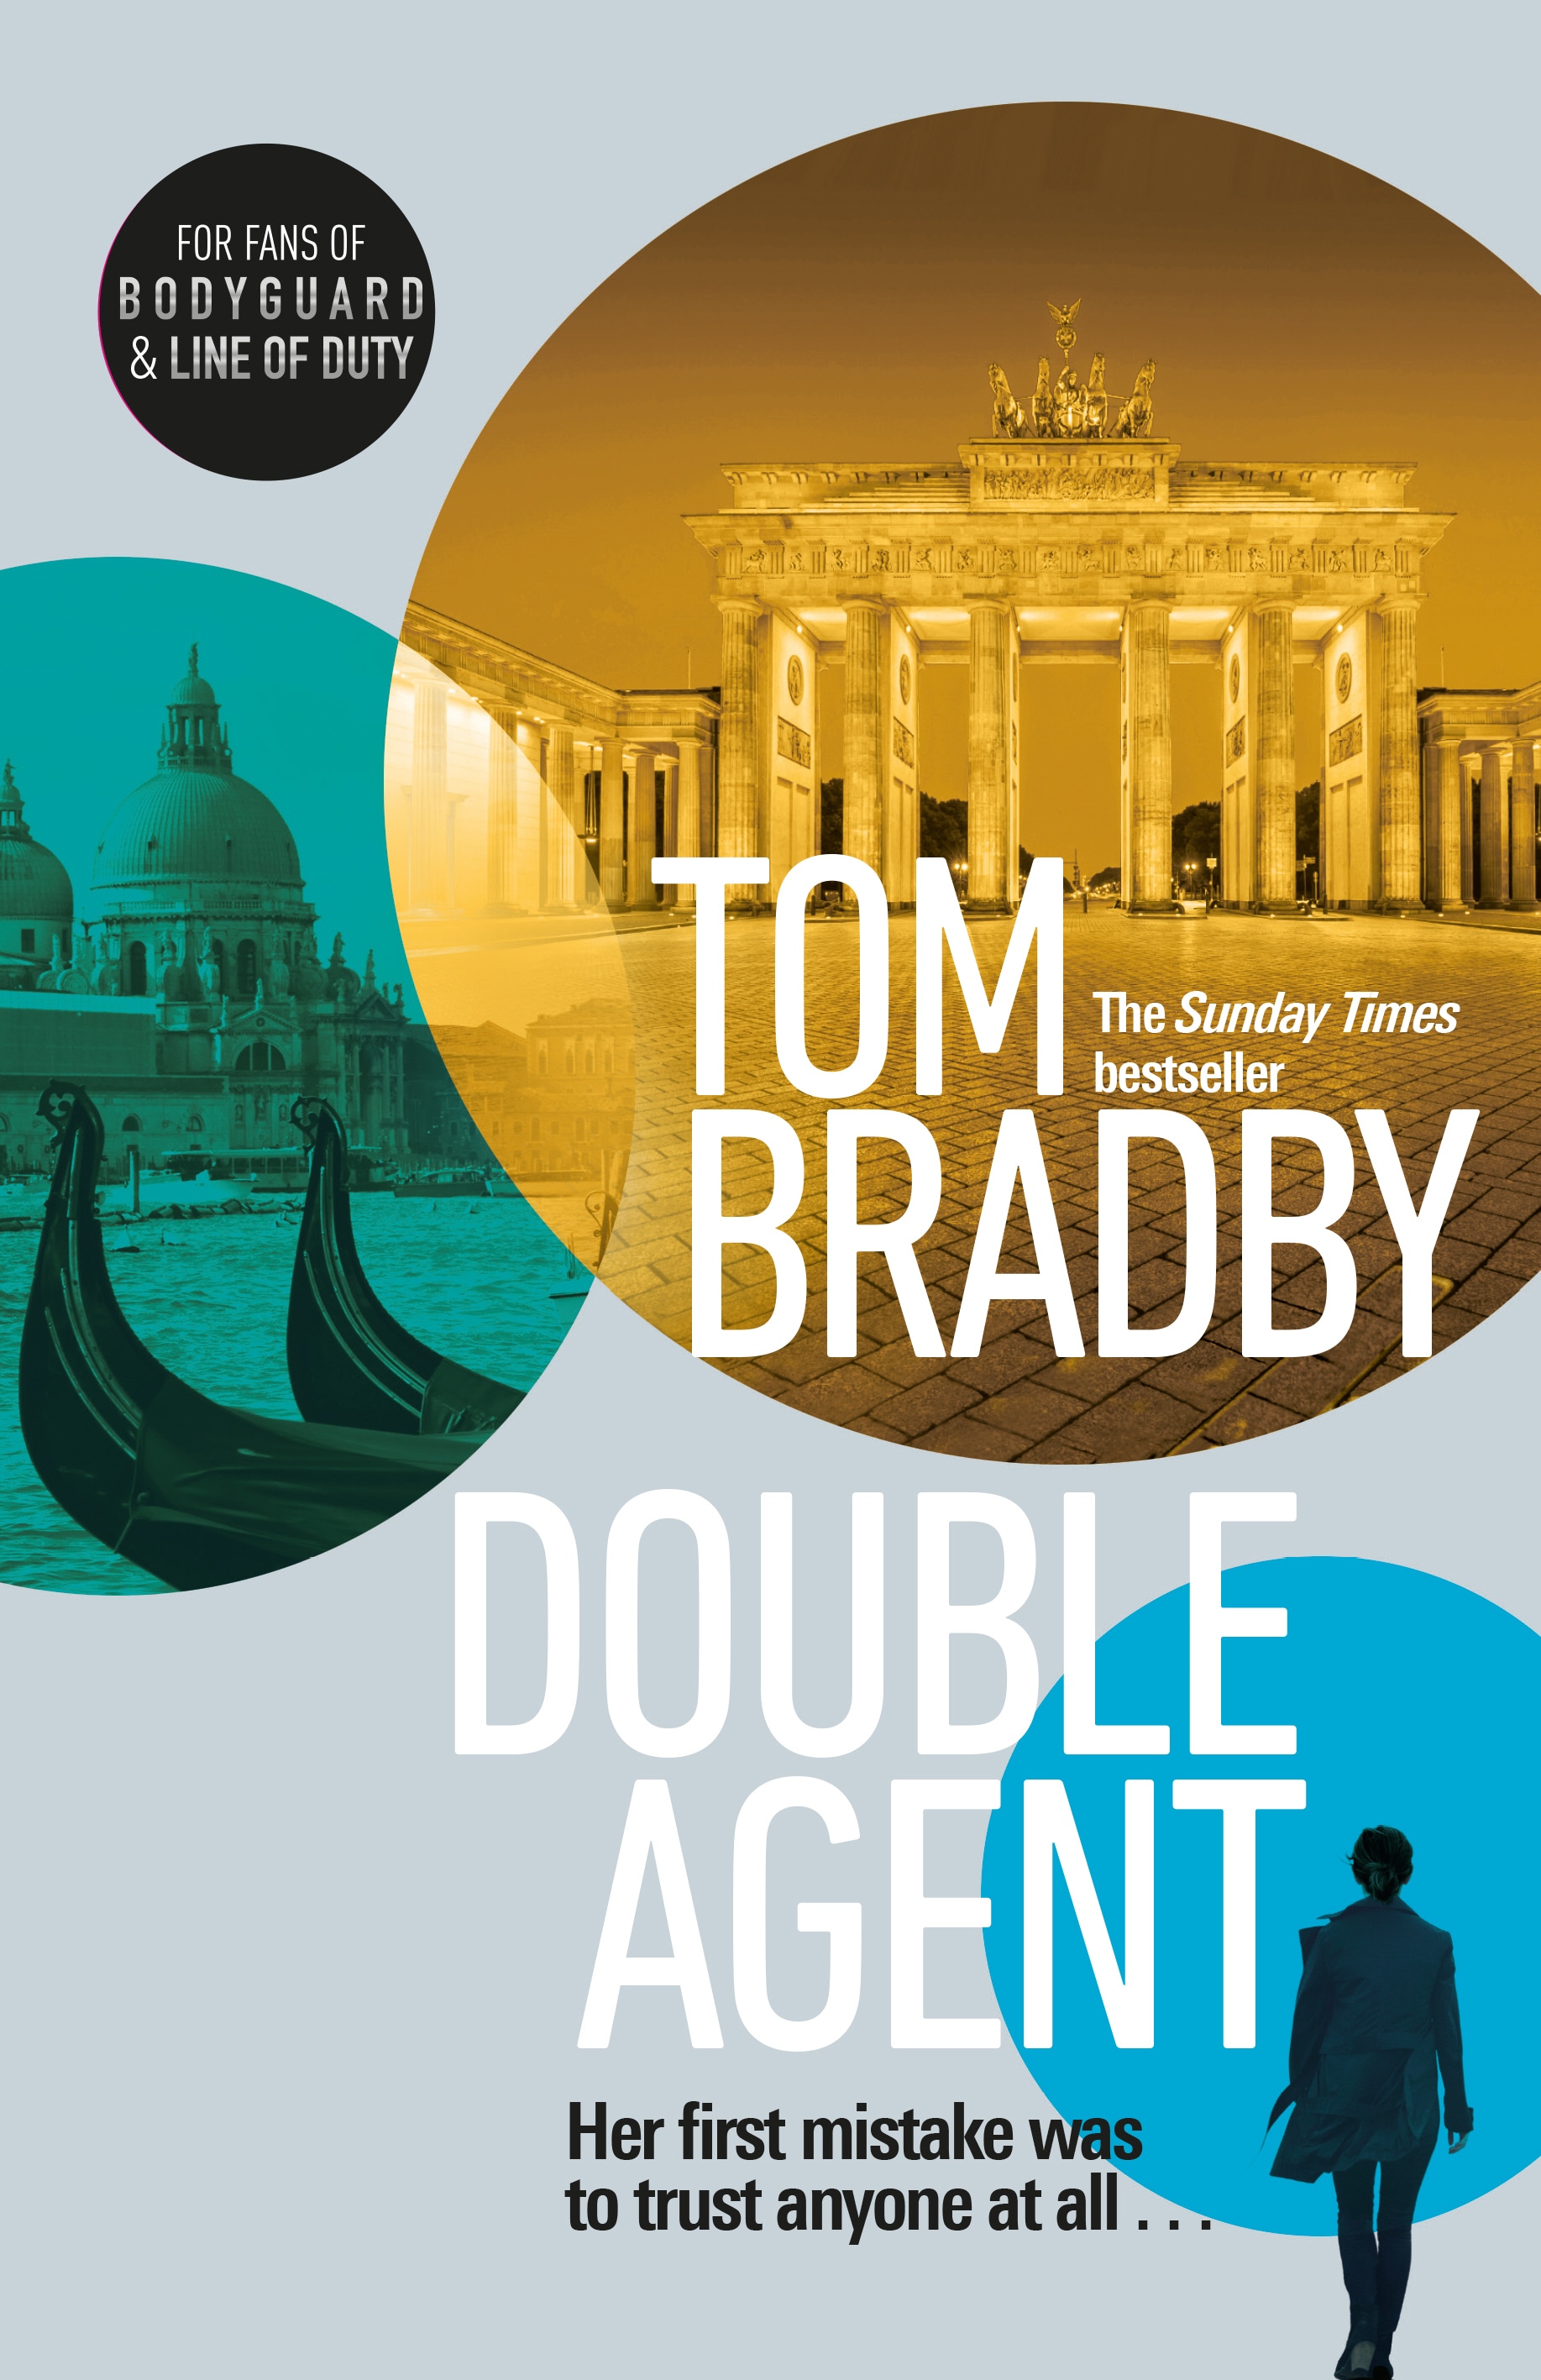 Book “Double Agent” by Tom Bradby — May 28, 2020